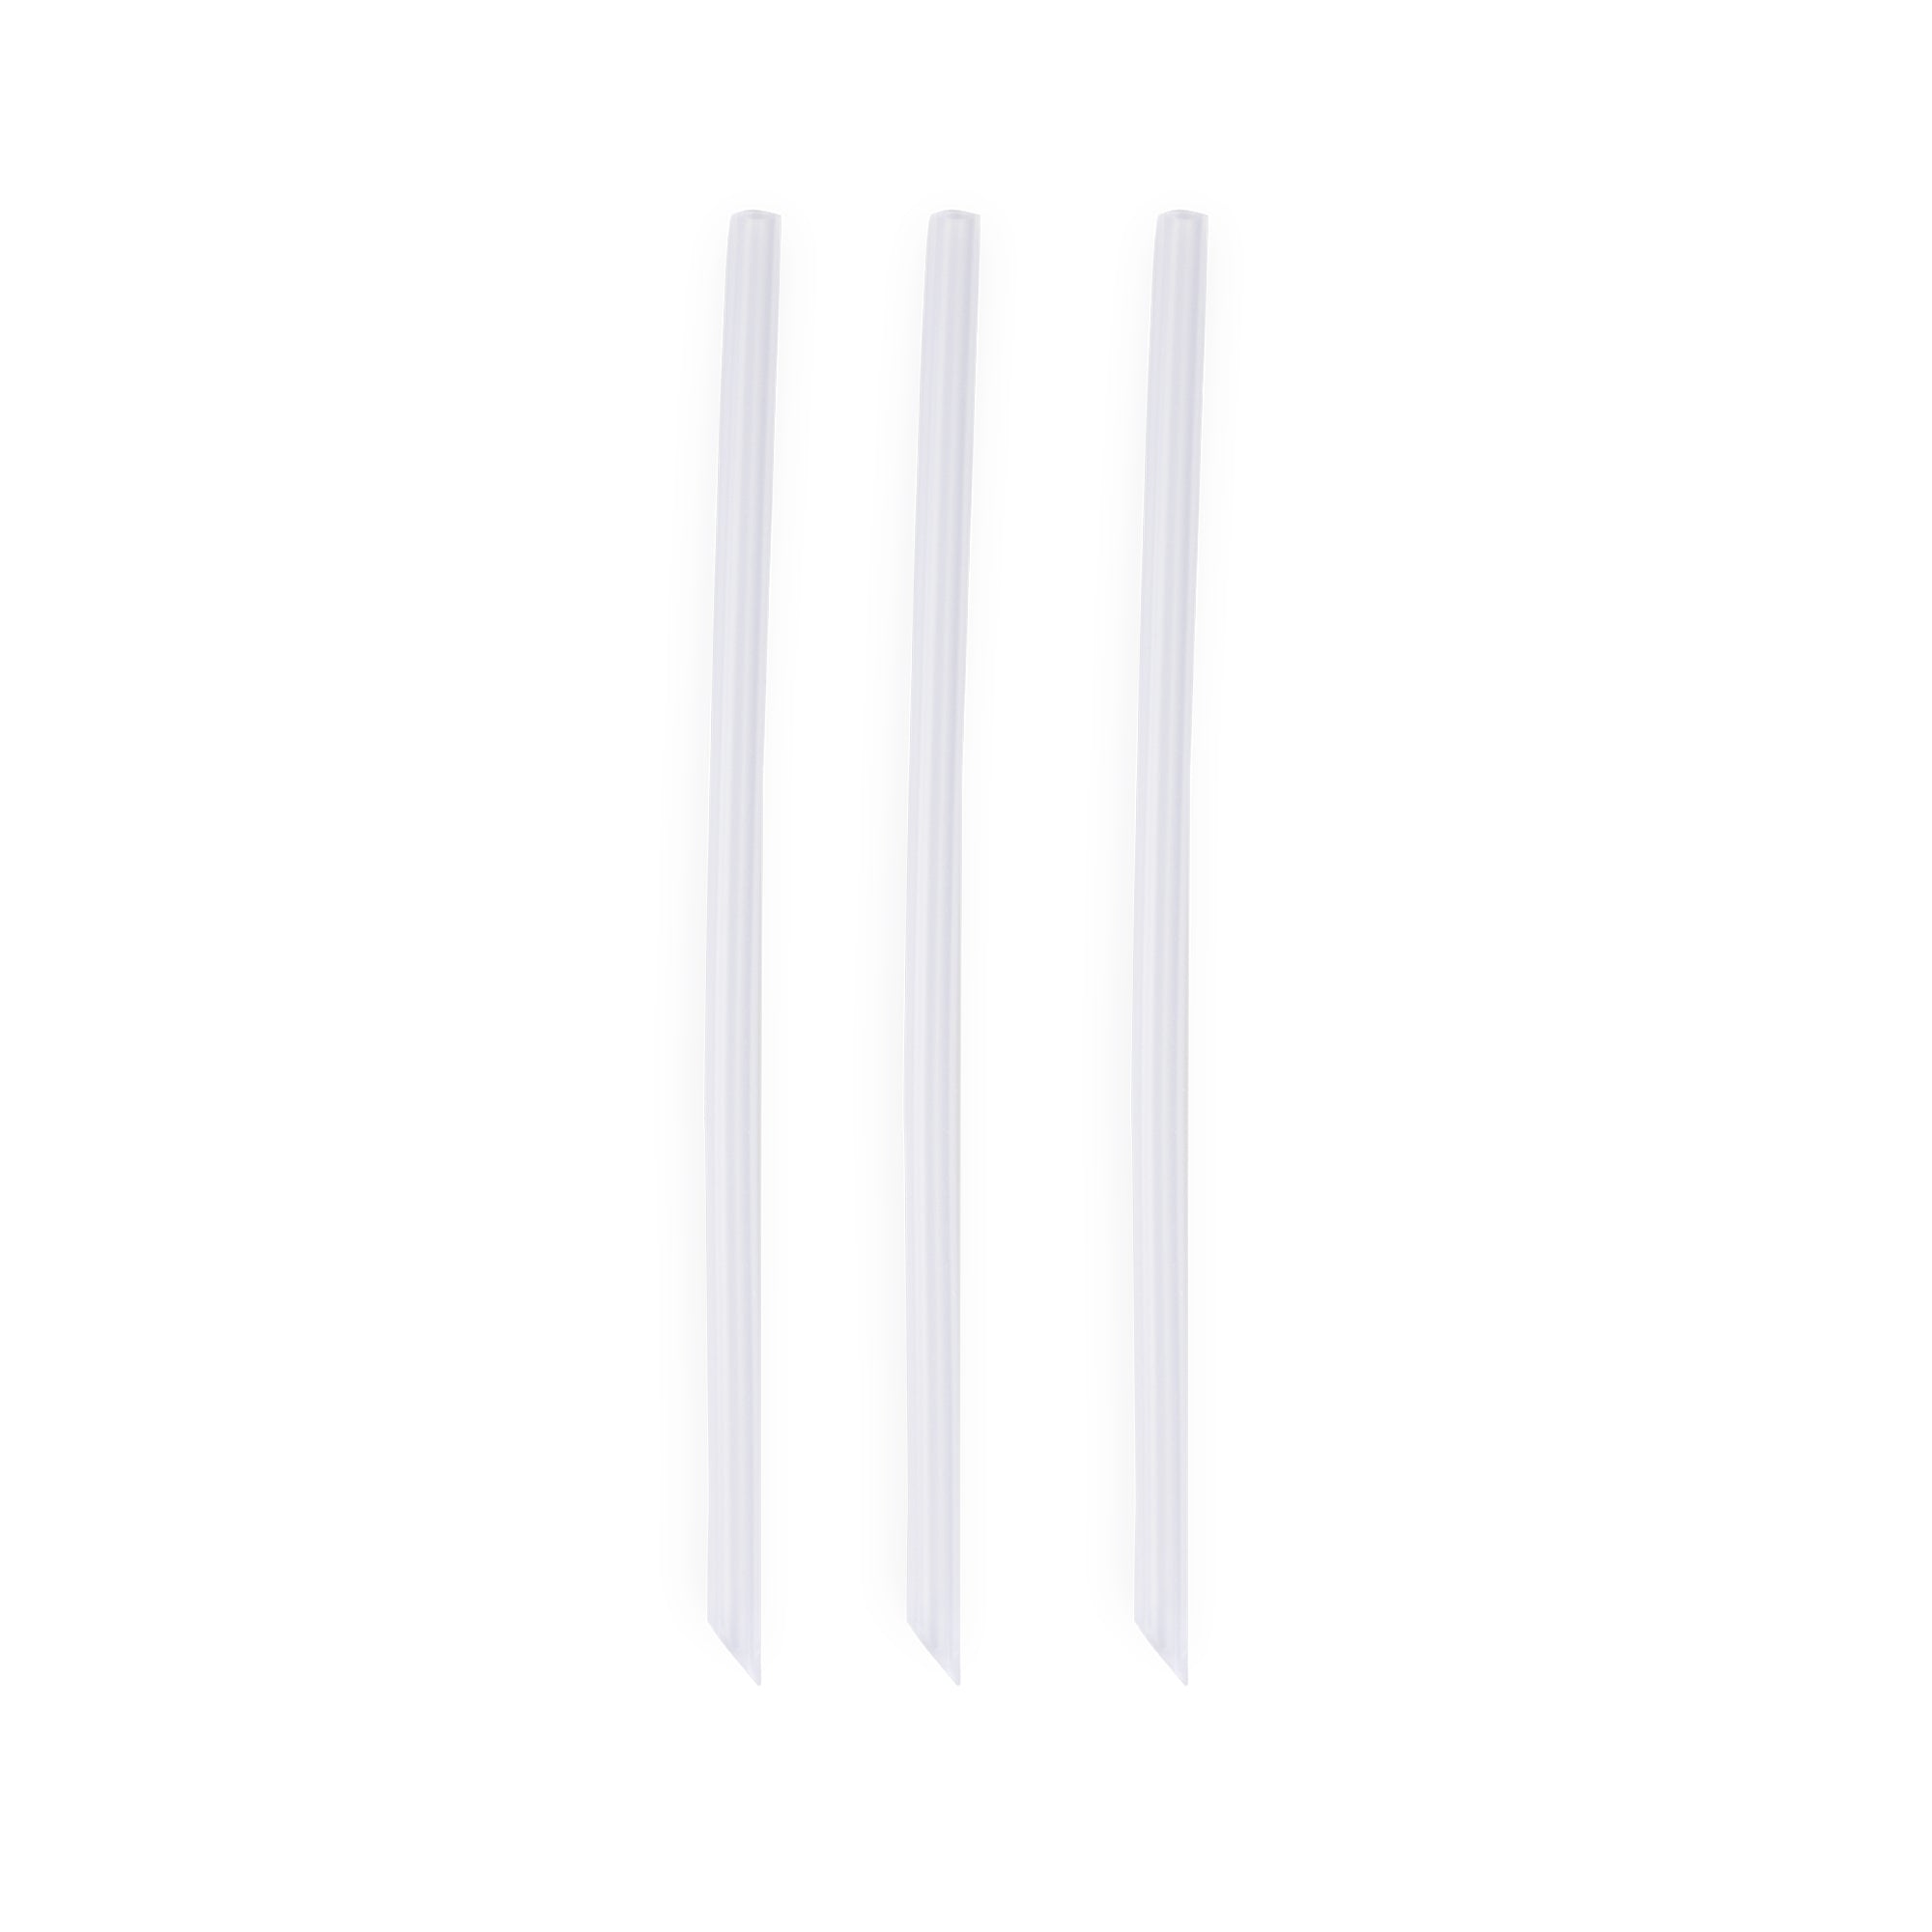 3 Pack of Silicone Straws